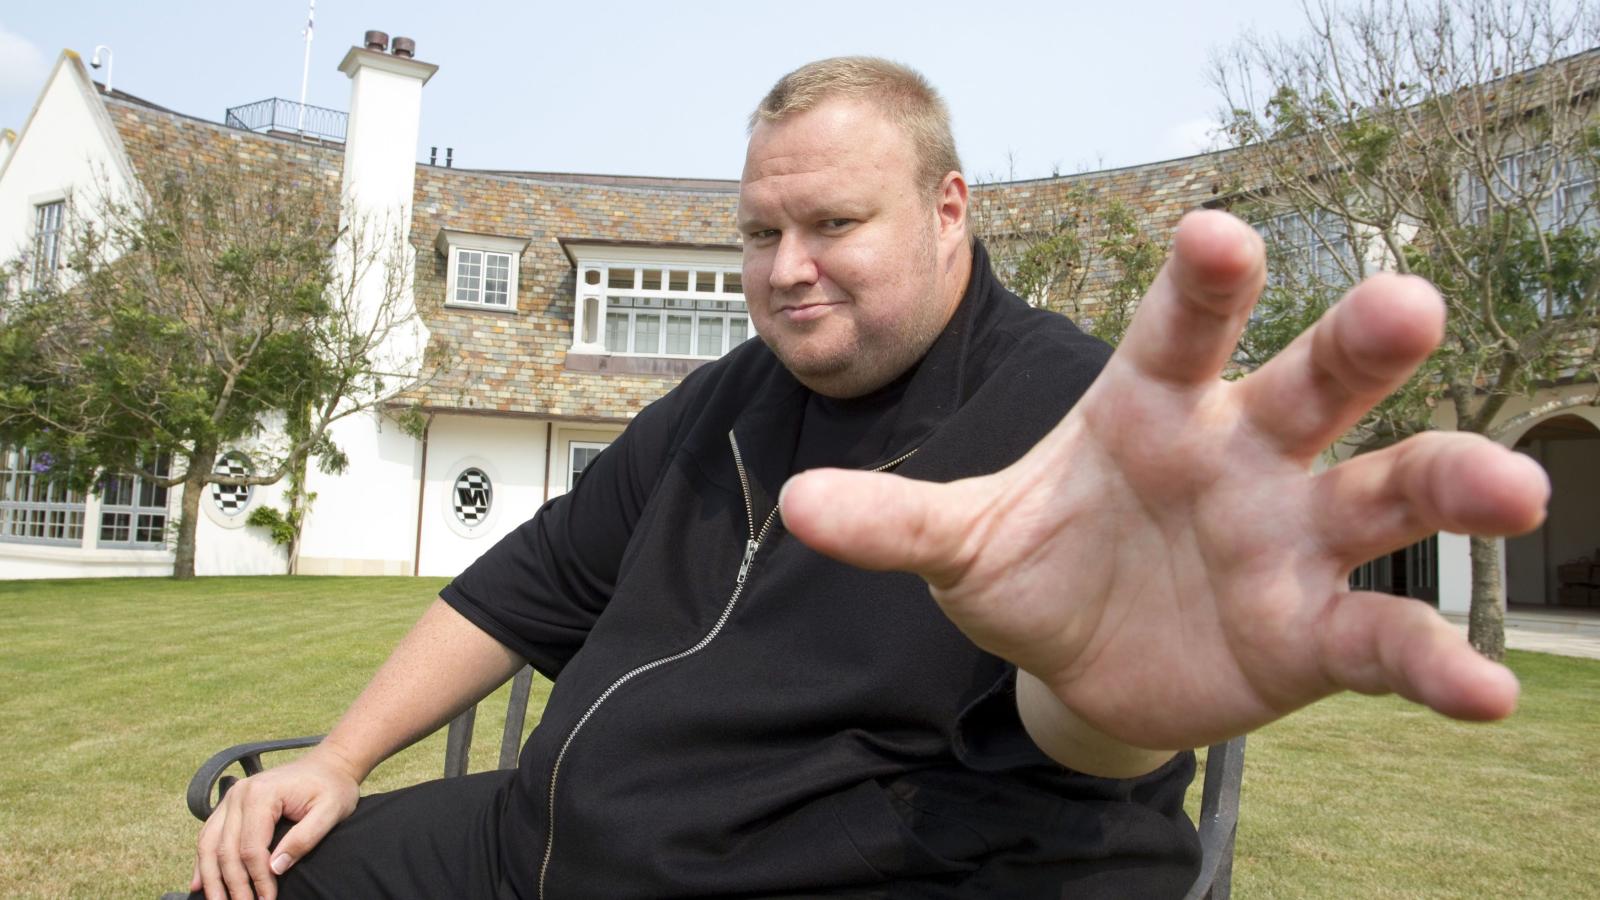 Kim Dotcom Discusses the Swelling Crypto Economy and His Plans to 'Accelerate P2P Electronic Cash'